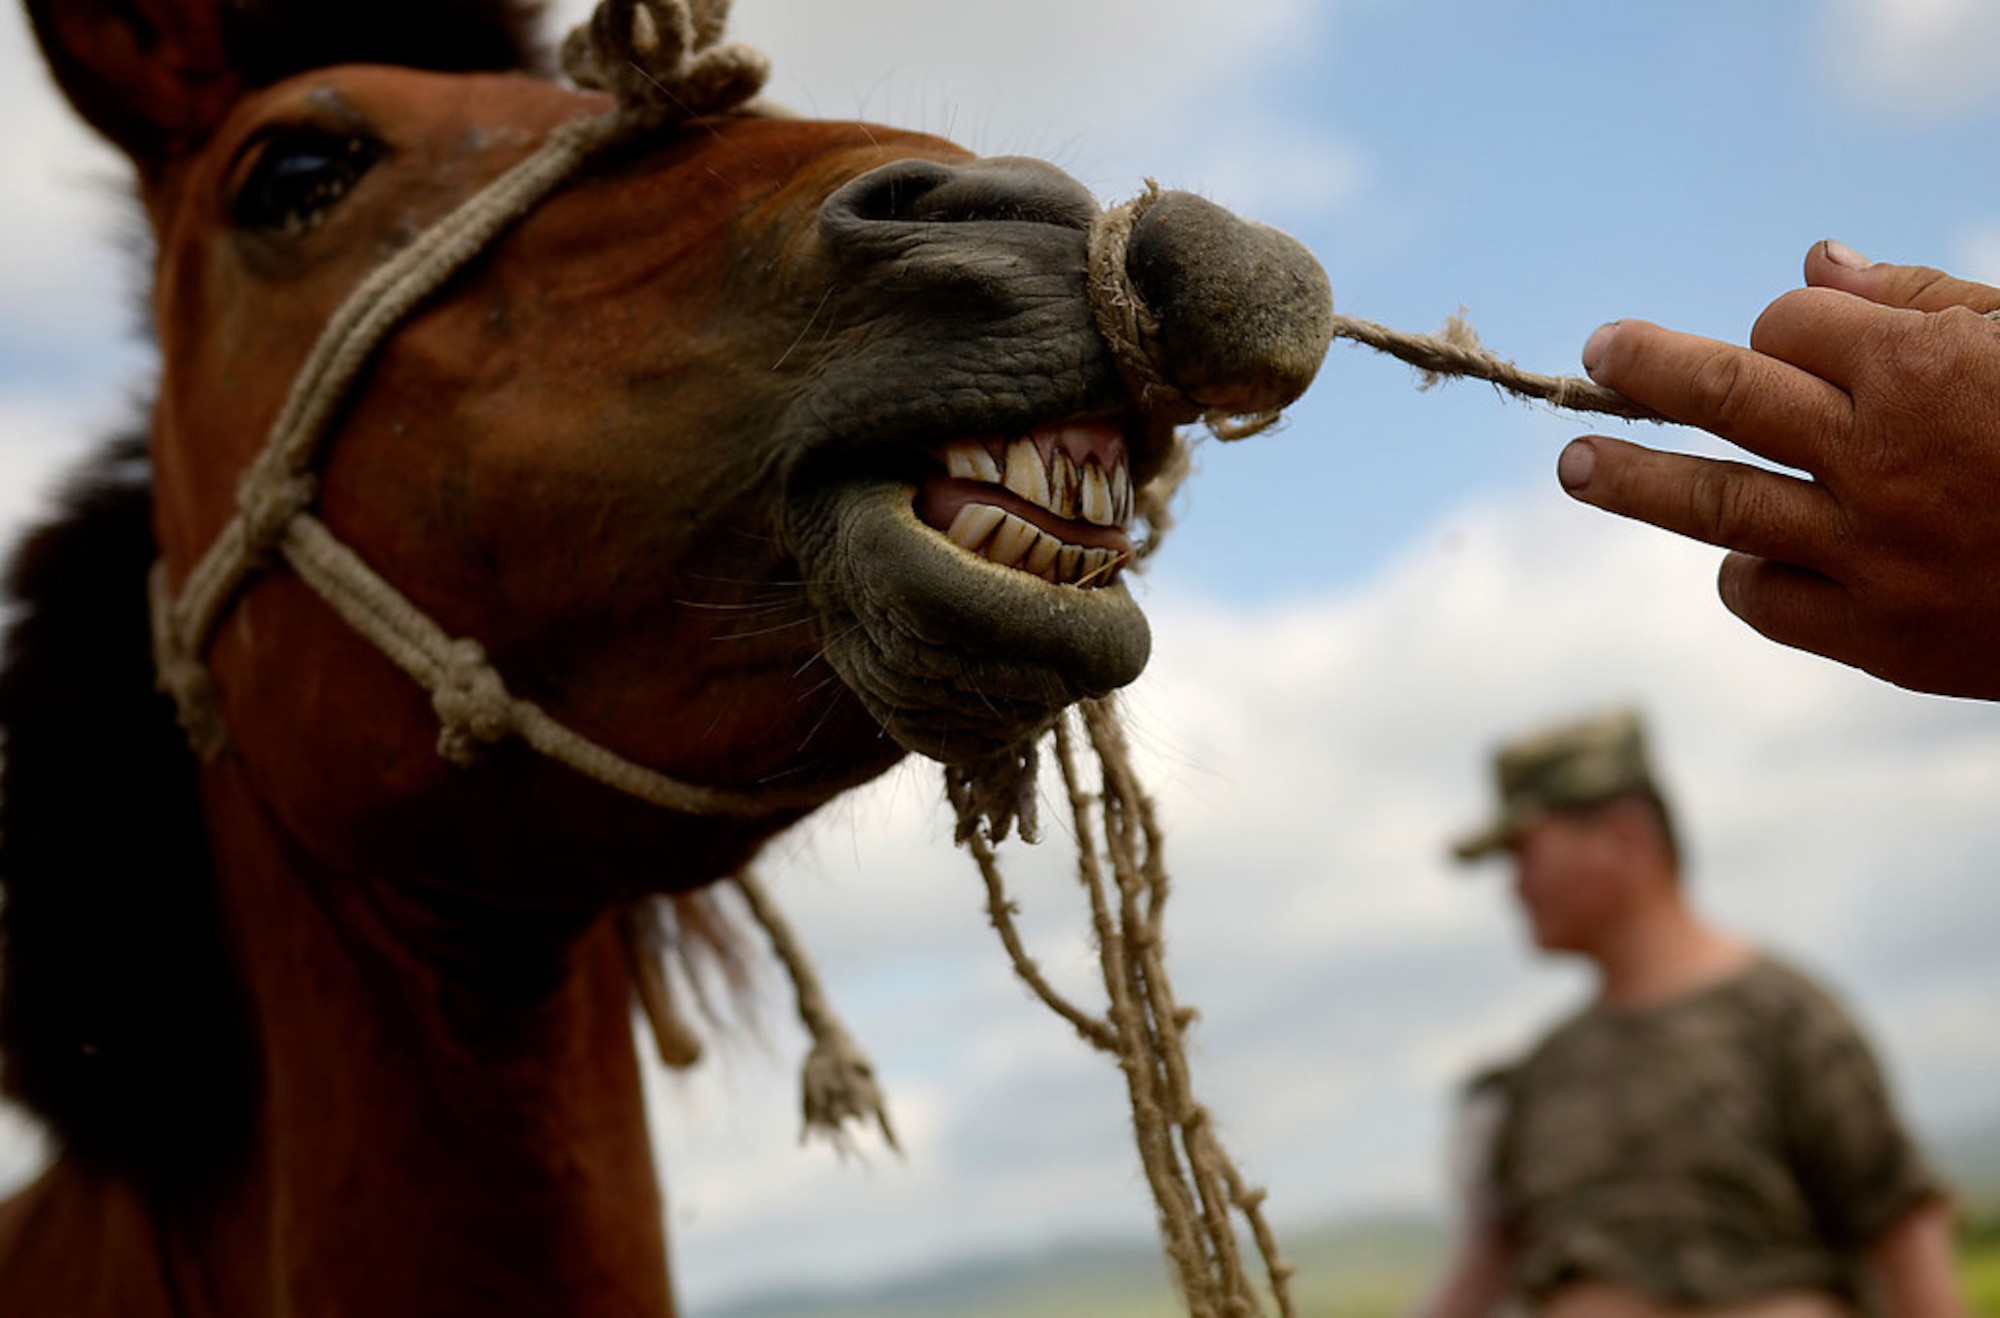 Veterinarians with the Mongolian Border Forces tries to coral a horse for a pregnancy check in northeastern Mongolia near the Russian border. A small harmless rope is tied around the horse's nose to help control the animal. (U.S. Air Force photo/Master Sgt. Jeremy T. Lock)